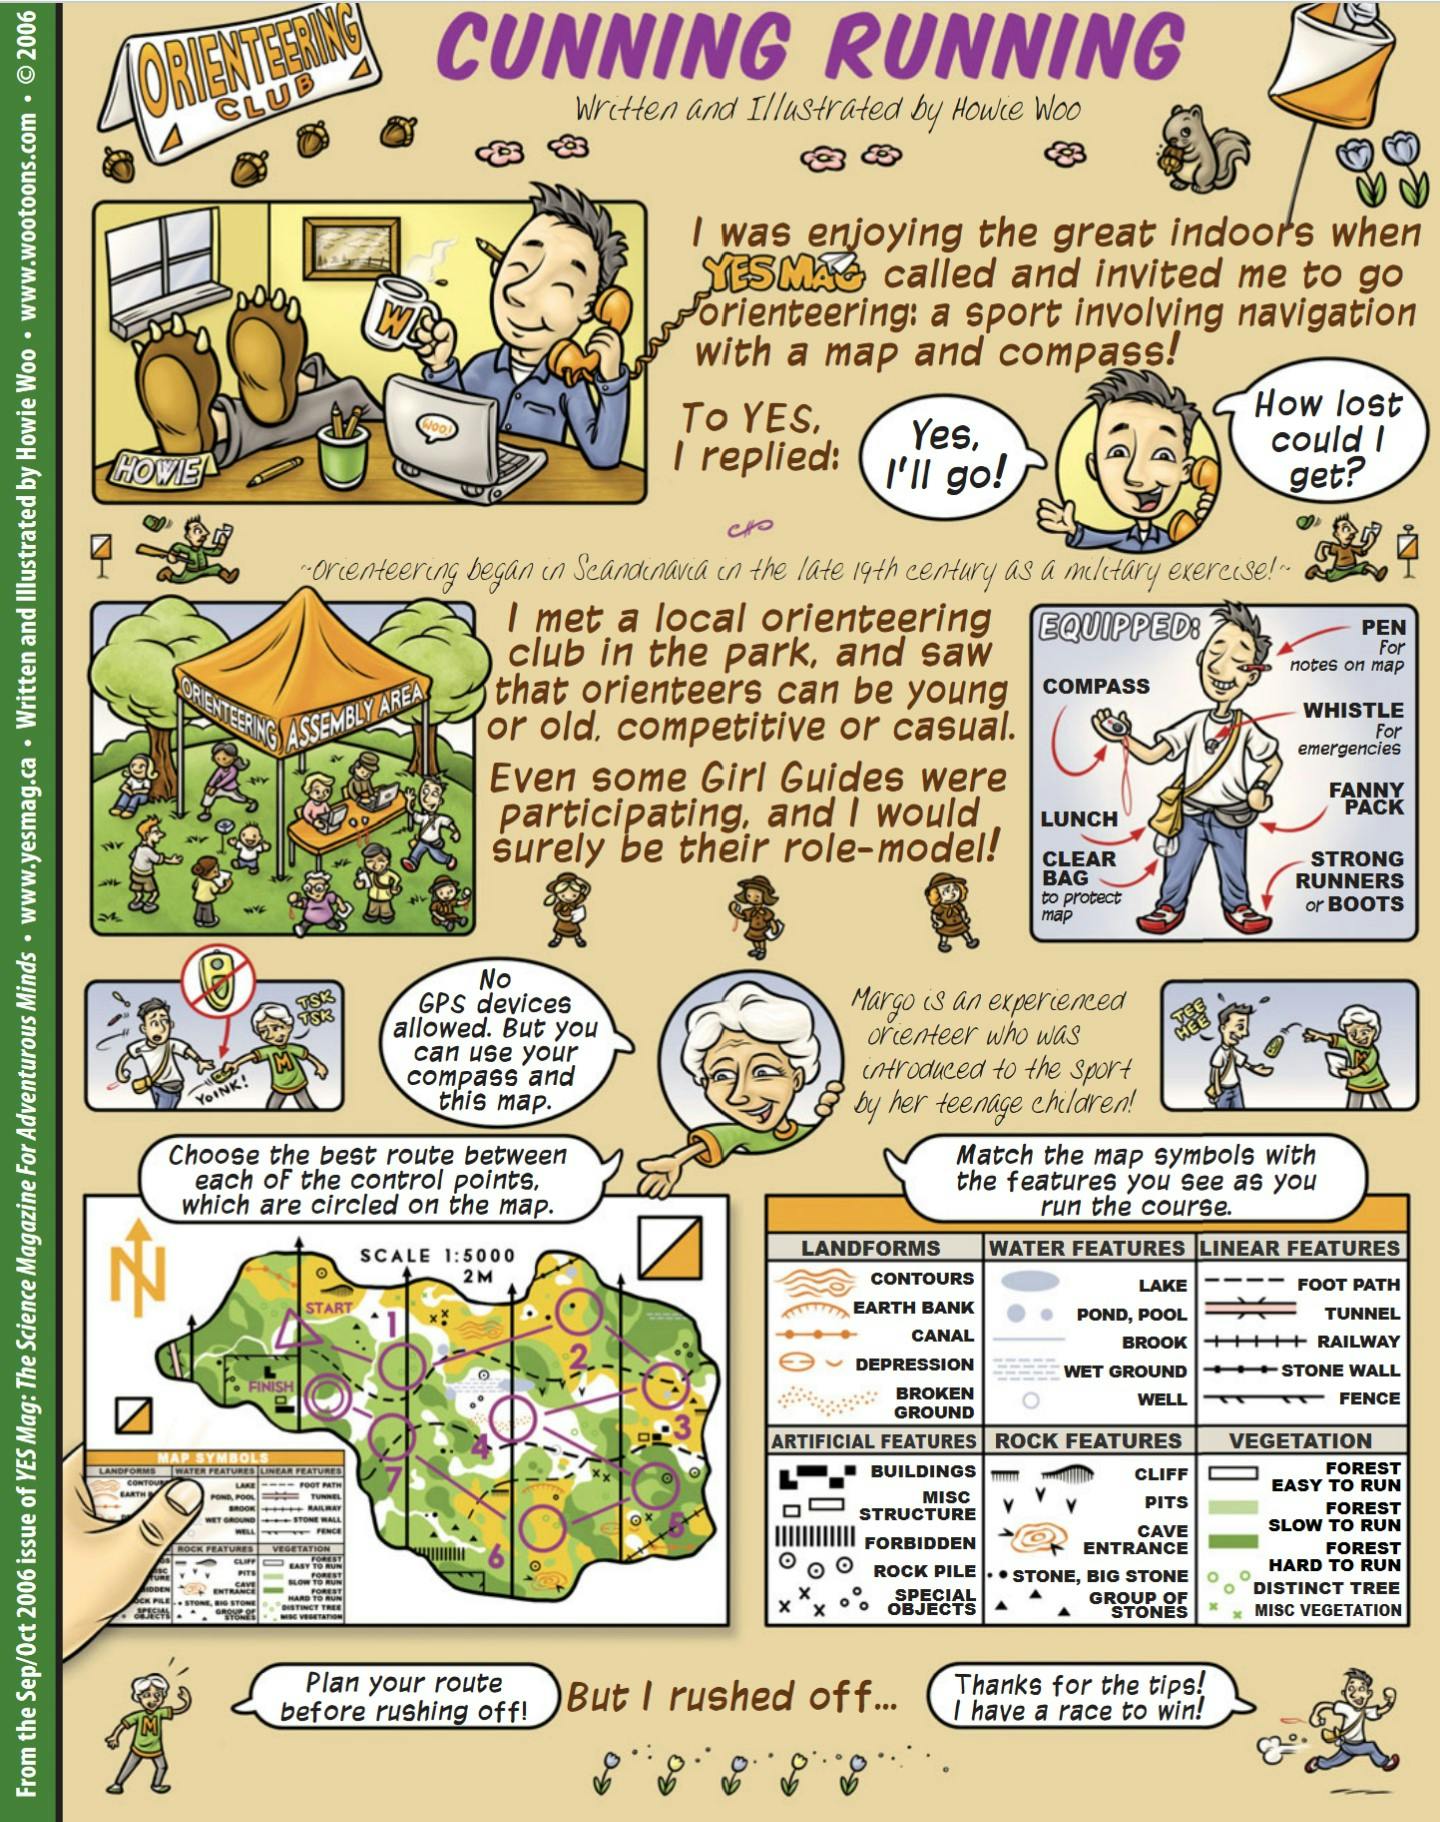 Page 1 of 2 of a cartoon by Howie Woo describing what happens at an orienteering event.